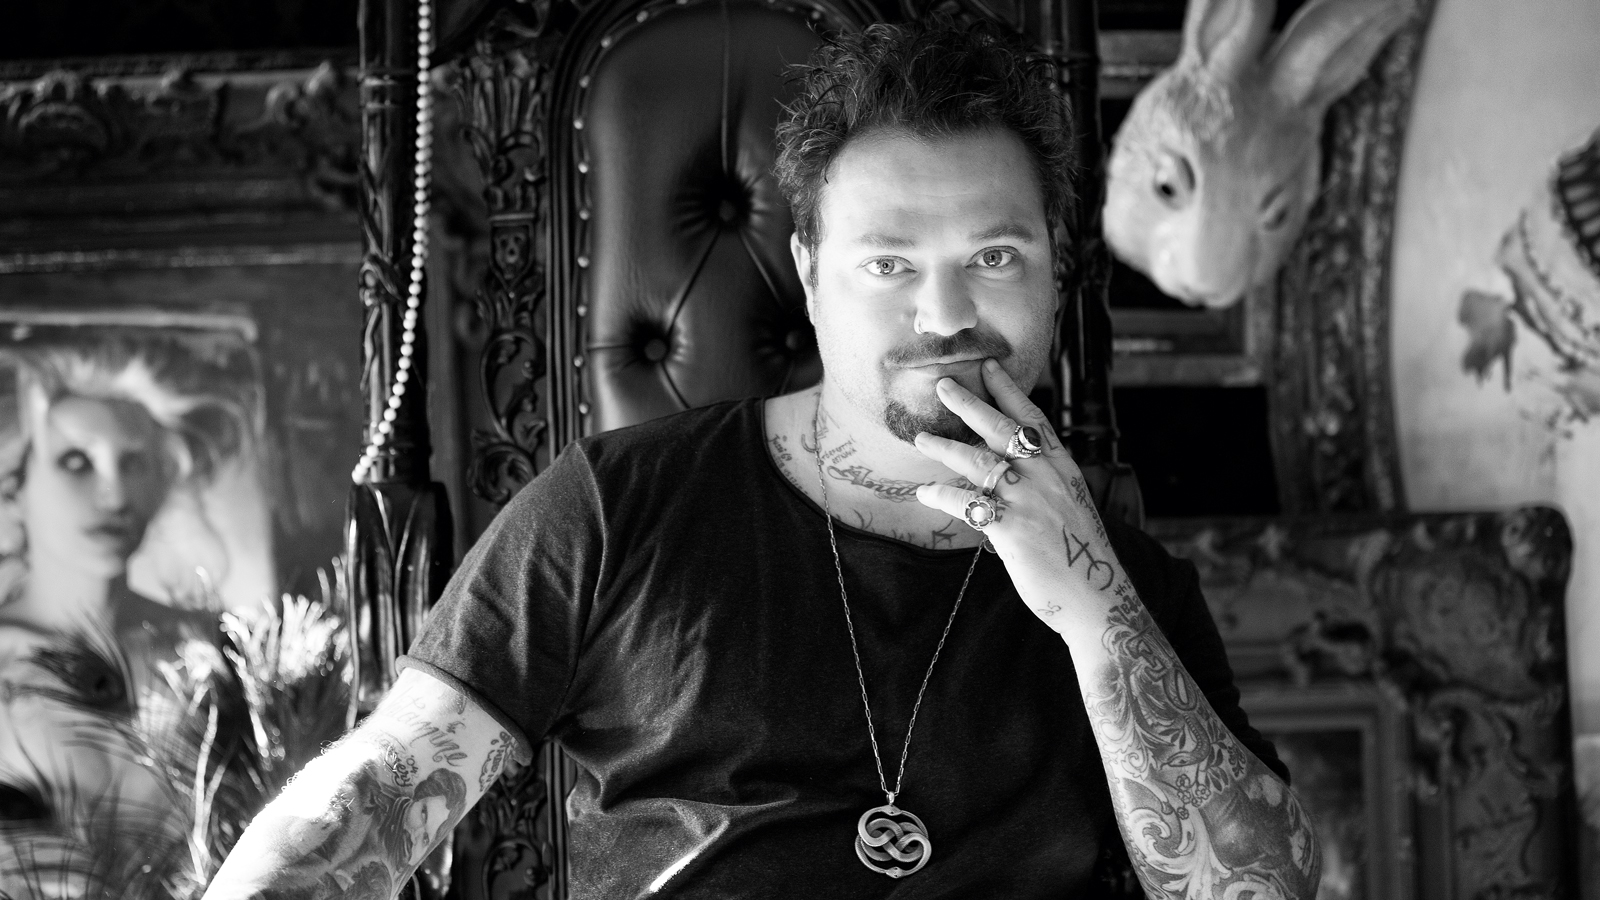 Bam Margera on Naked Stalkers, Bad Tattoos, Finding Sobriety After Jackass Revolver